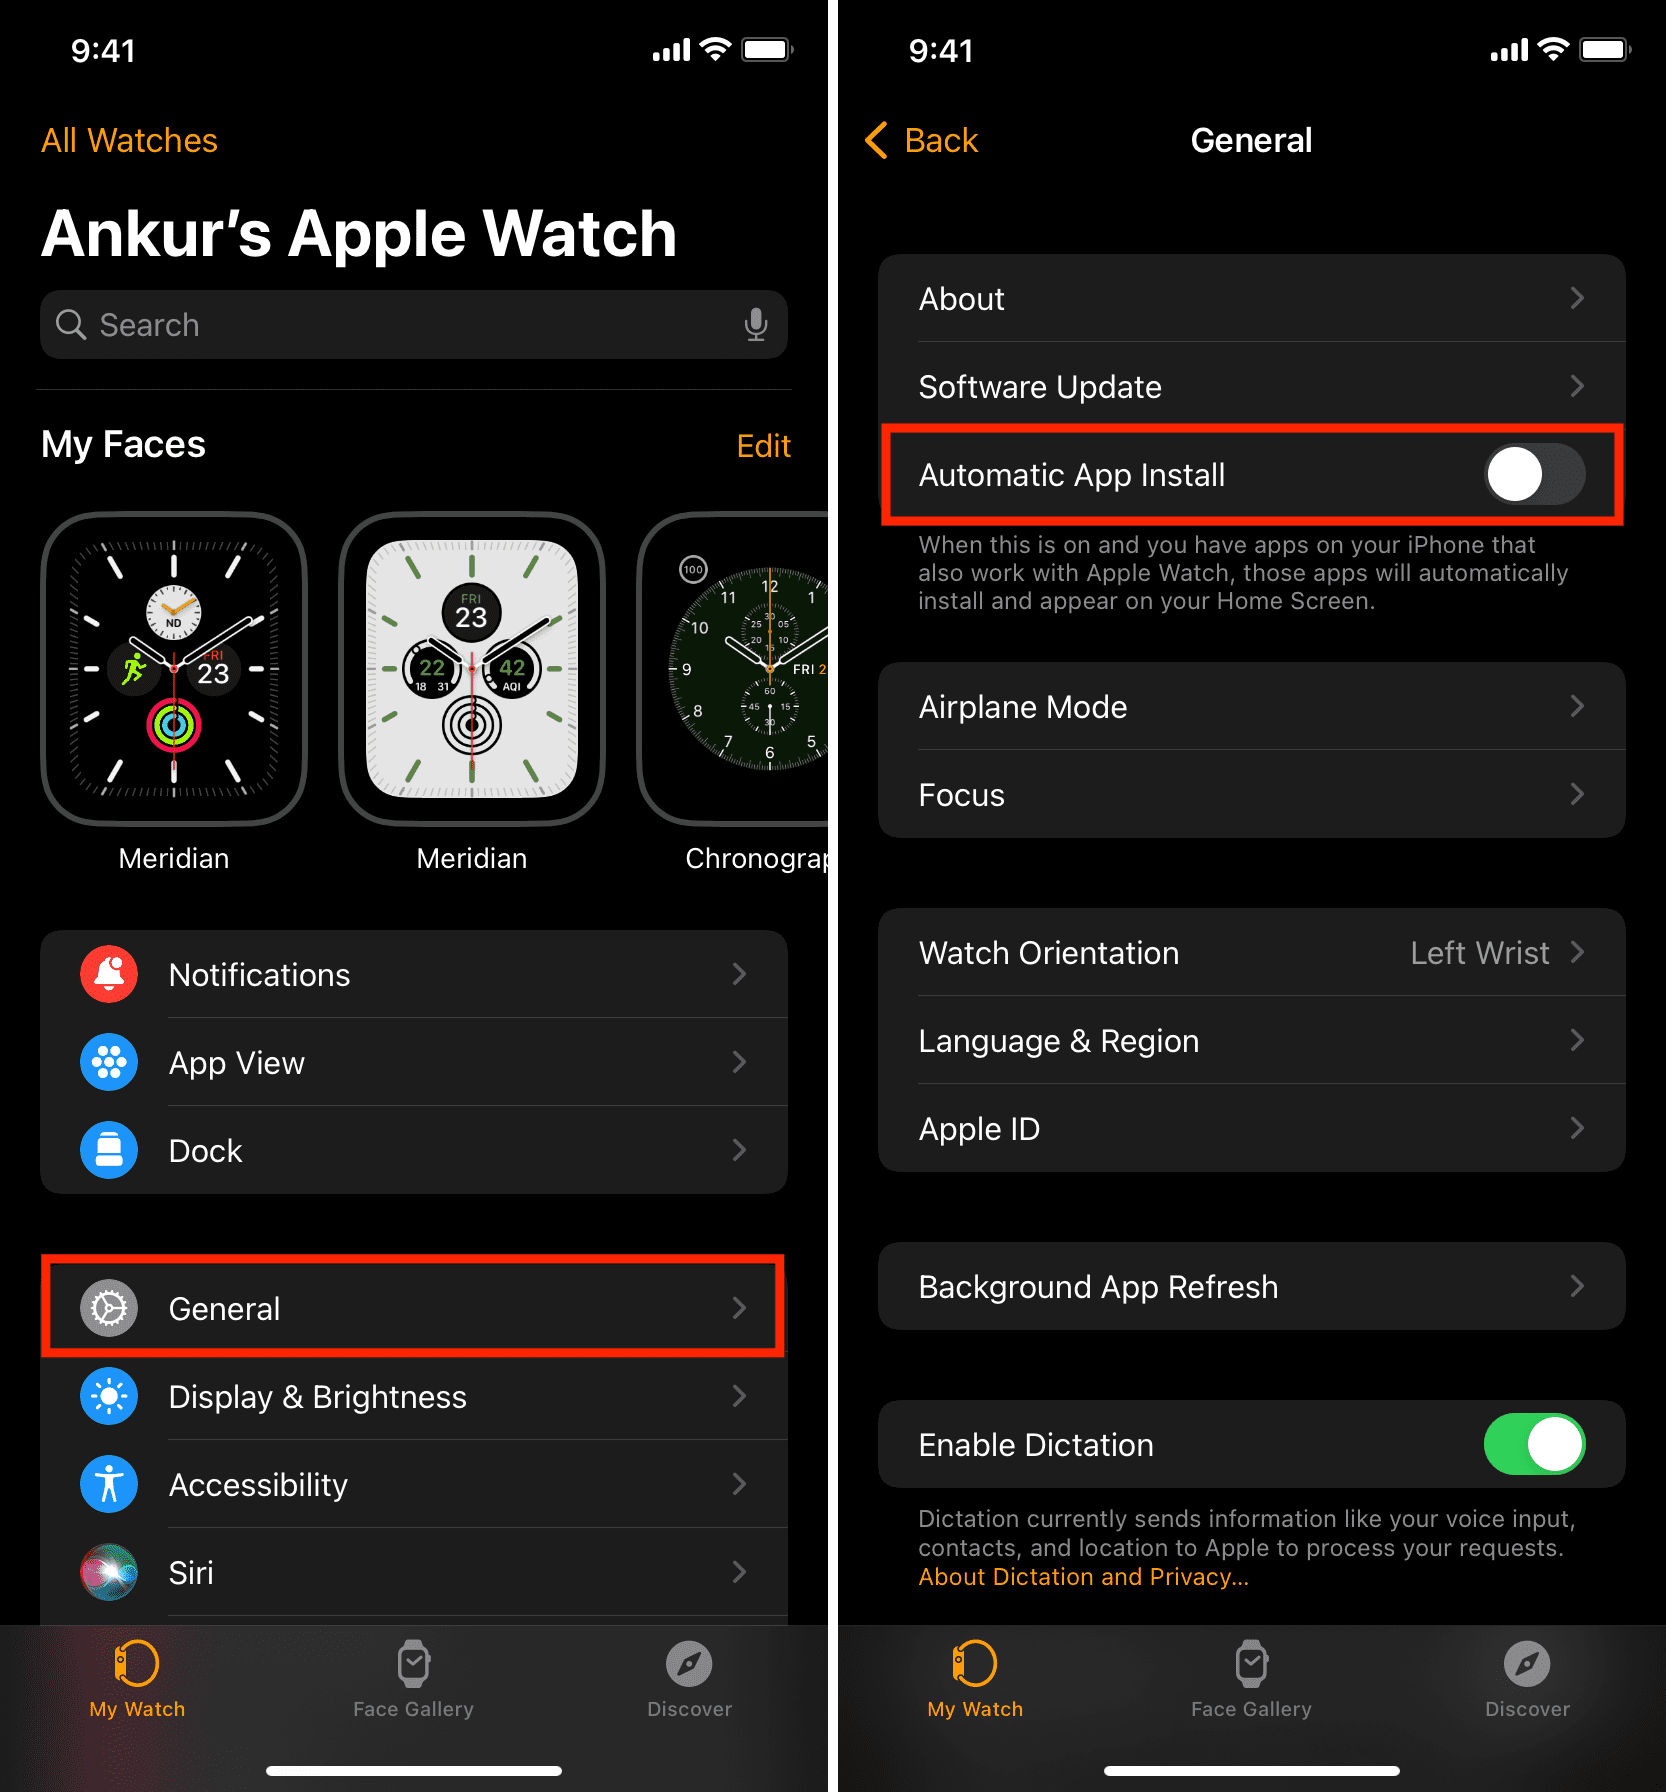 Turn off Automatic App Install for Apple Watch